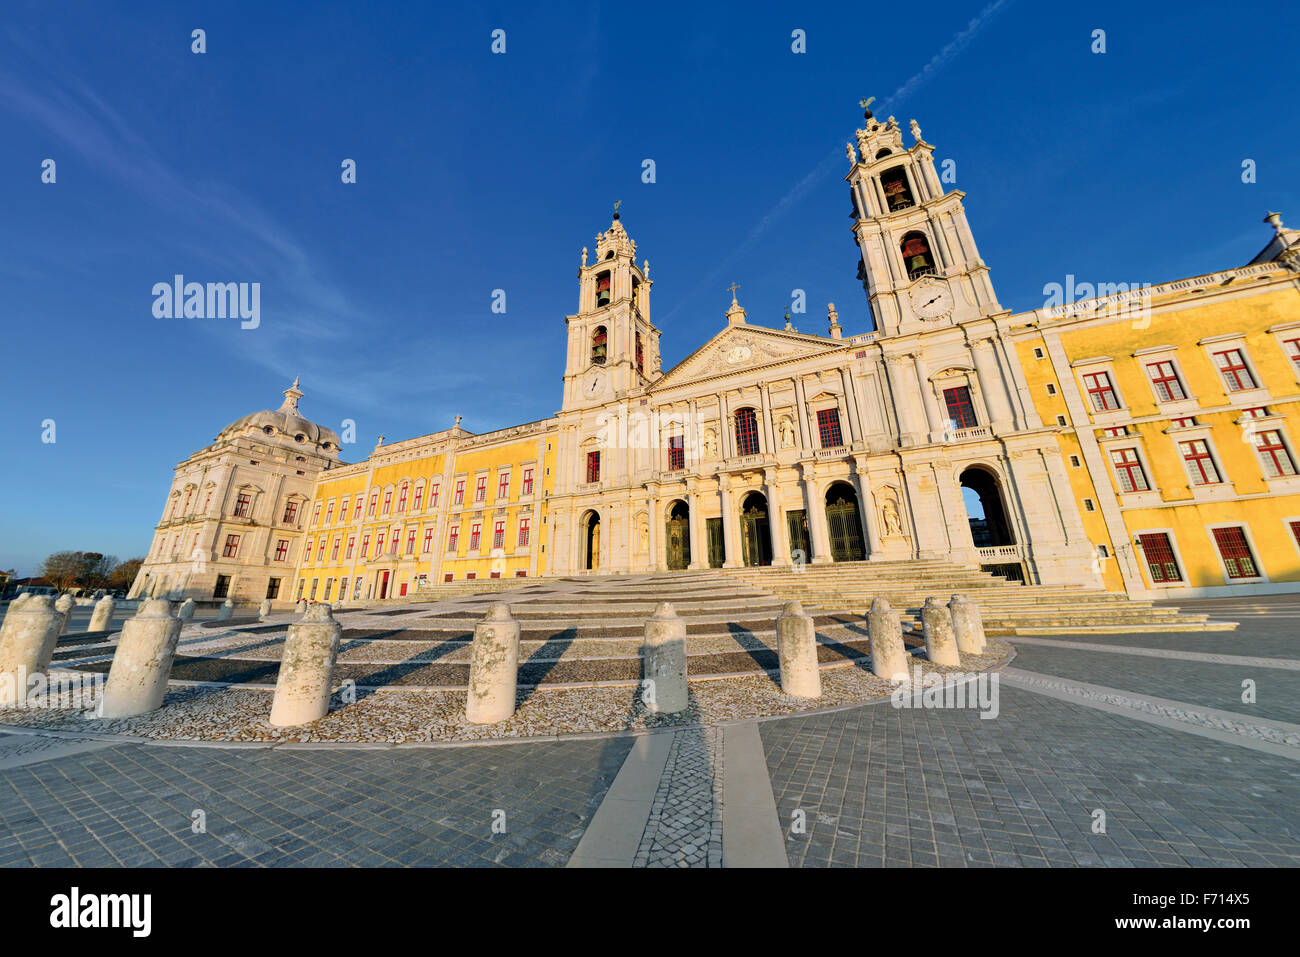 Portugal: National Palace and Monastery of Mafra Stock Photo